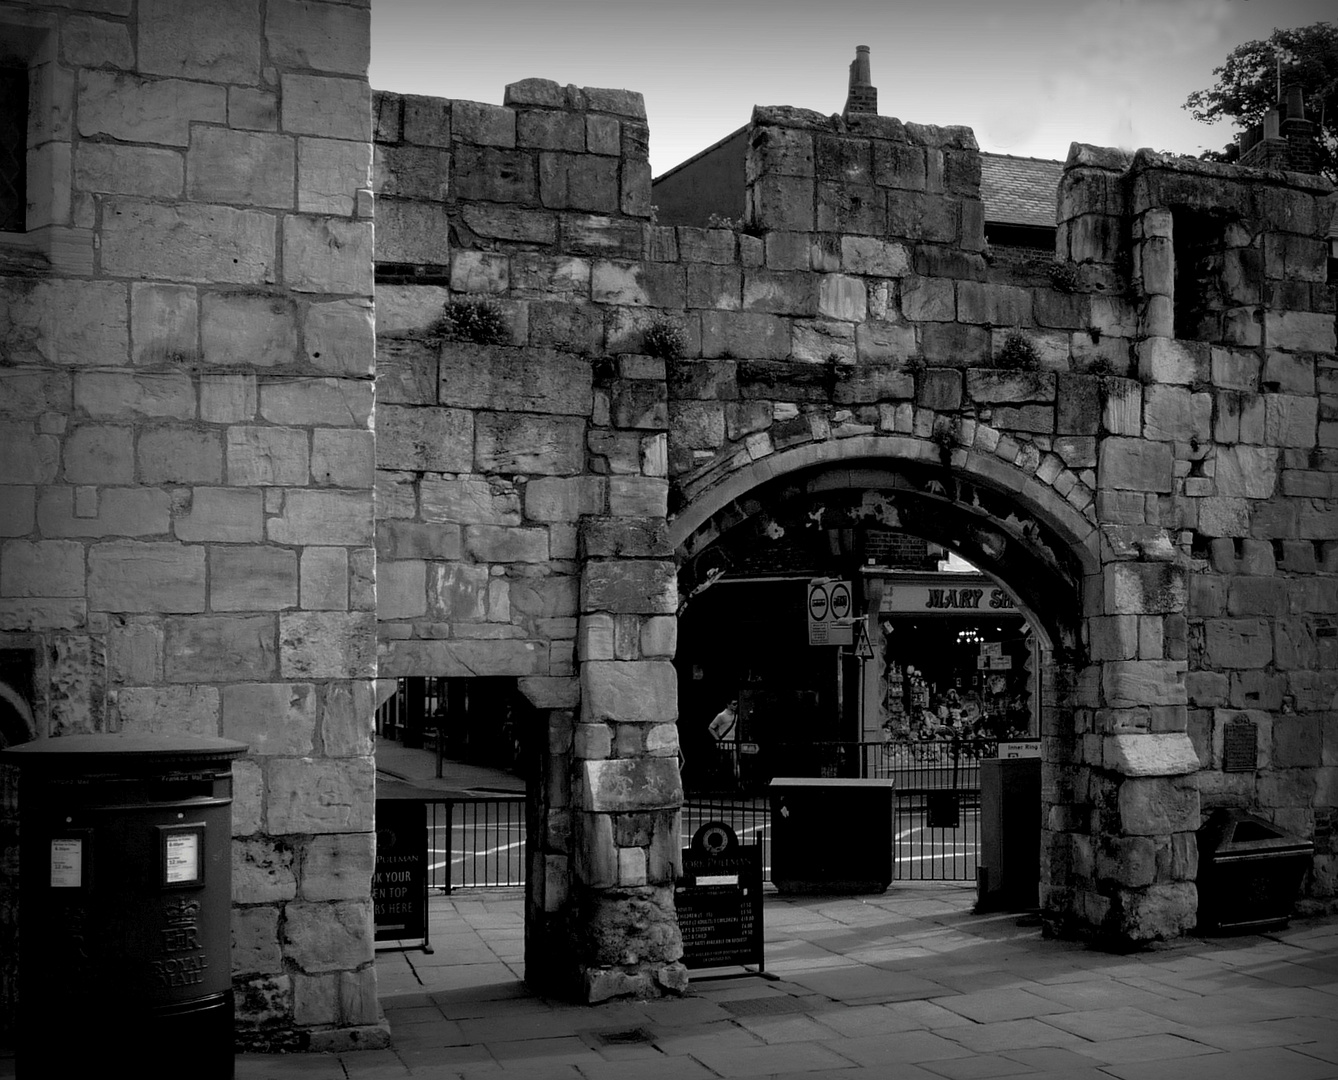 The Gillygate in York